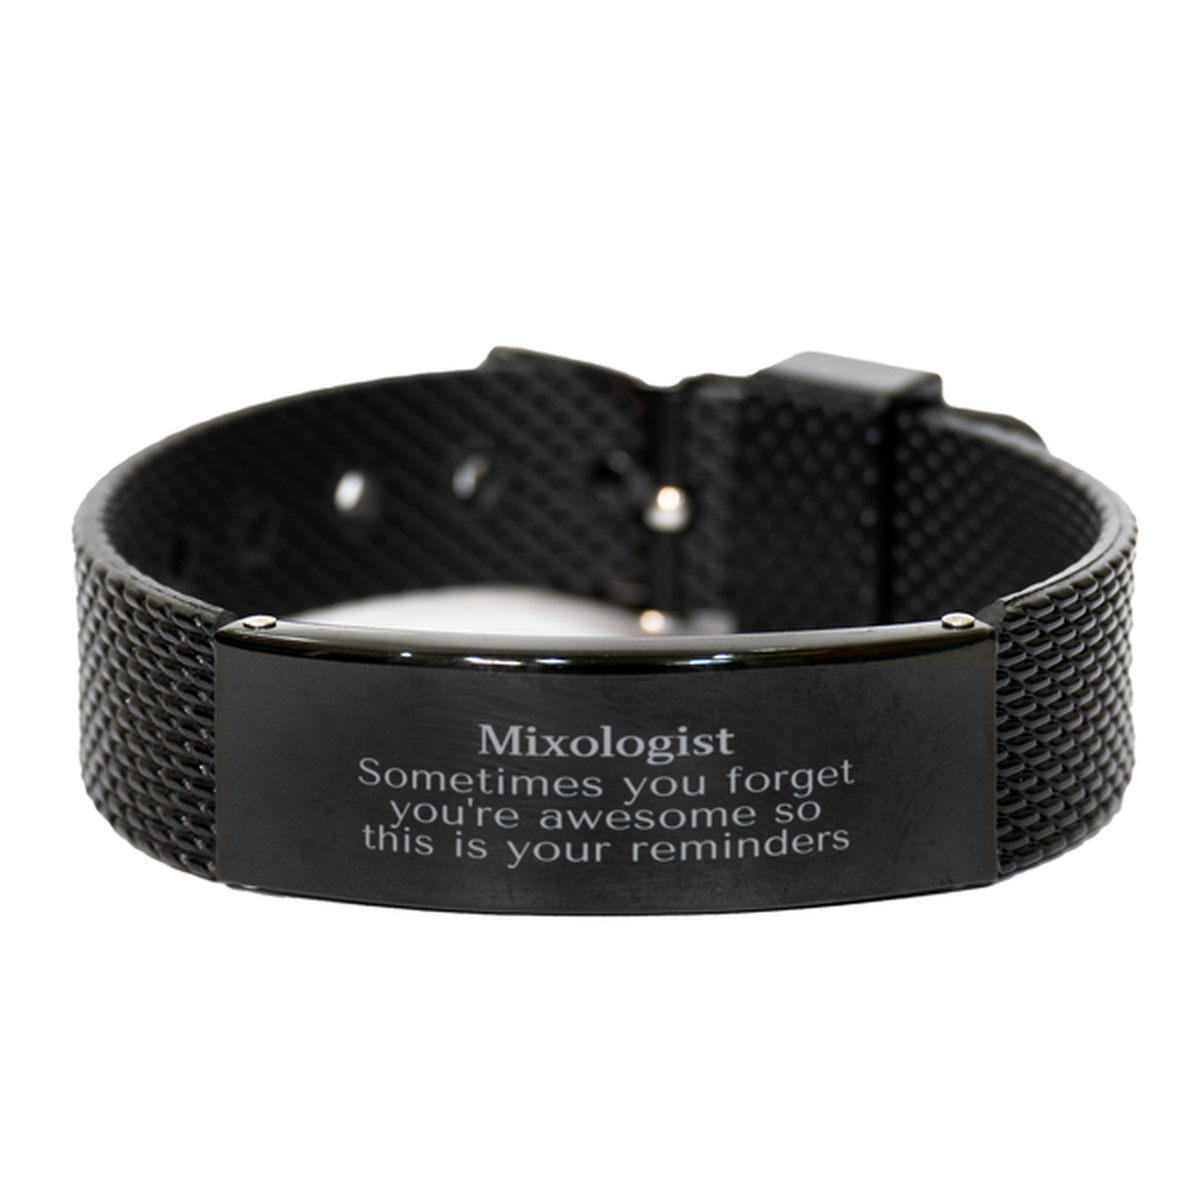 Sentimental Mixologist Black Shark Mesh Bracelet, Mixologist Sometimes you forget you're awesome so this is your reminders, Graduation Christmas Birthday Gifts for Mixologist, Men, Women, Coworkers